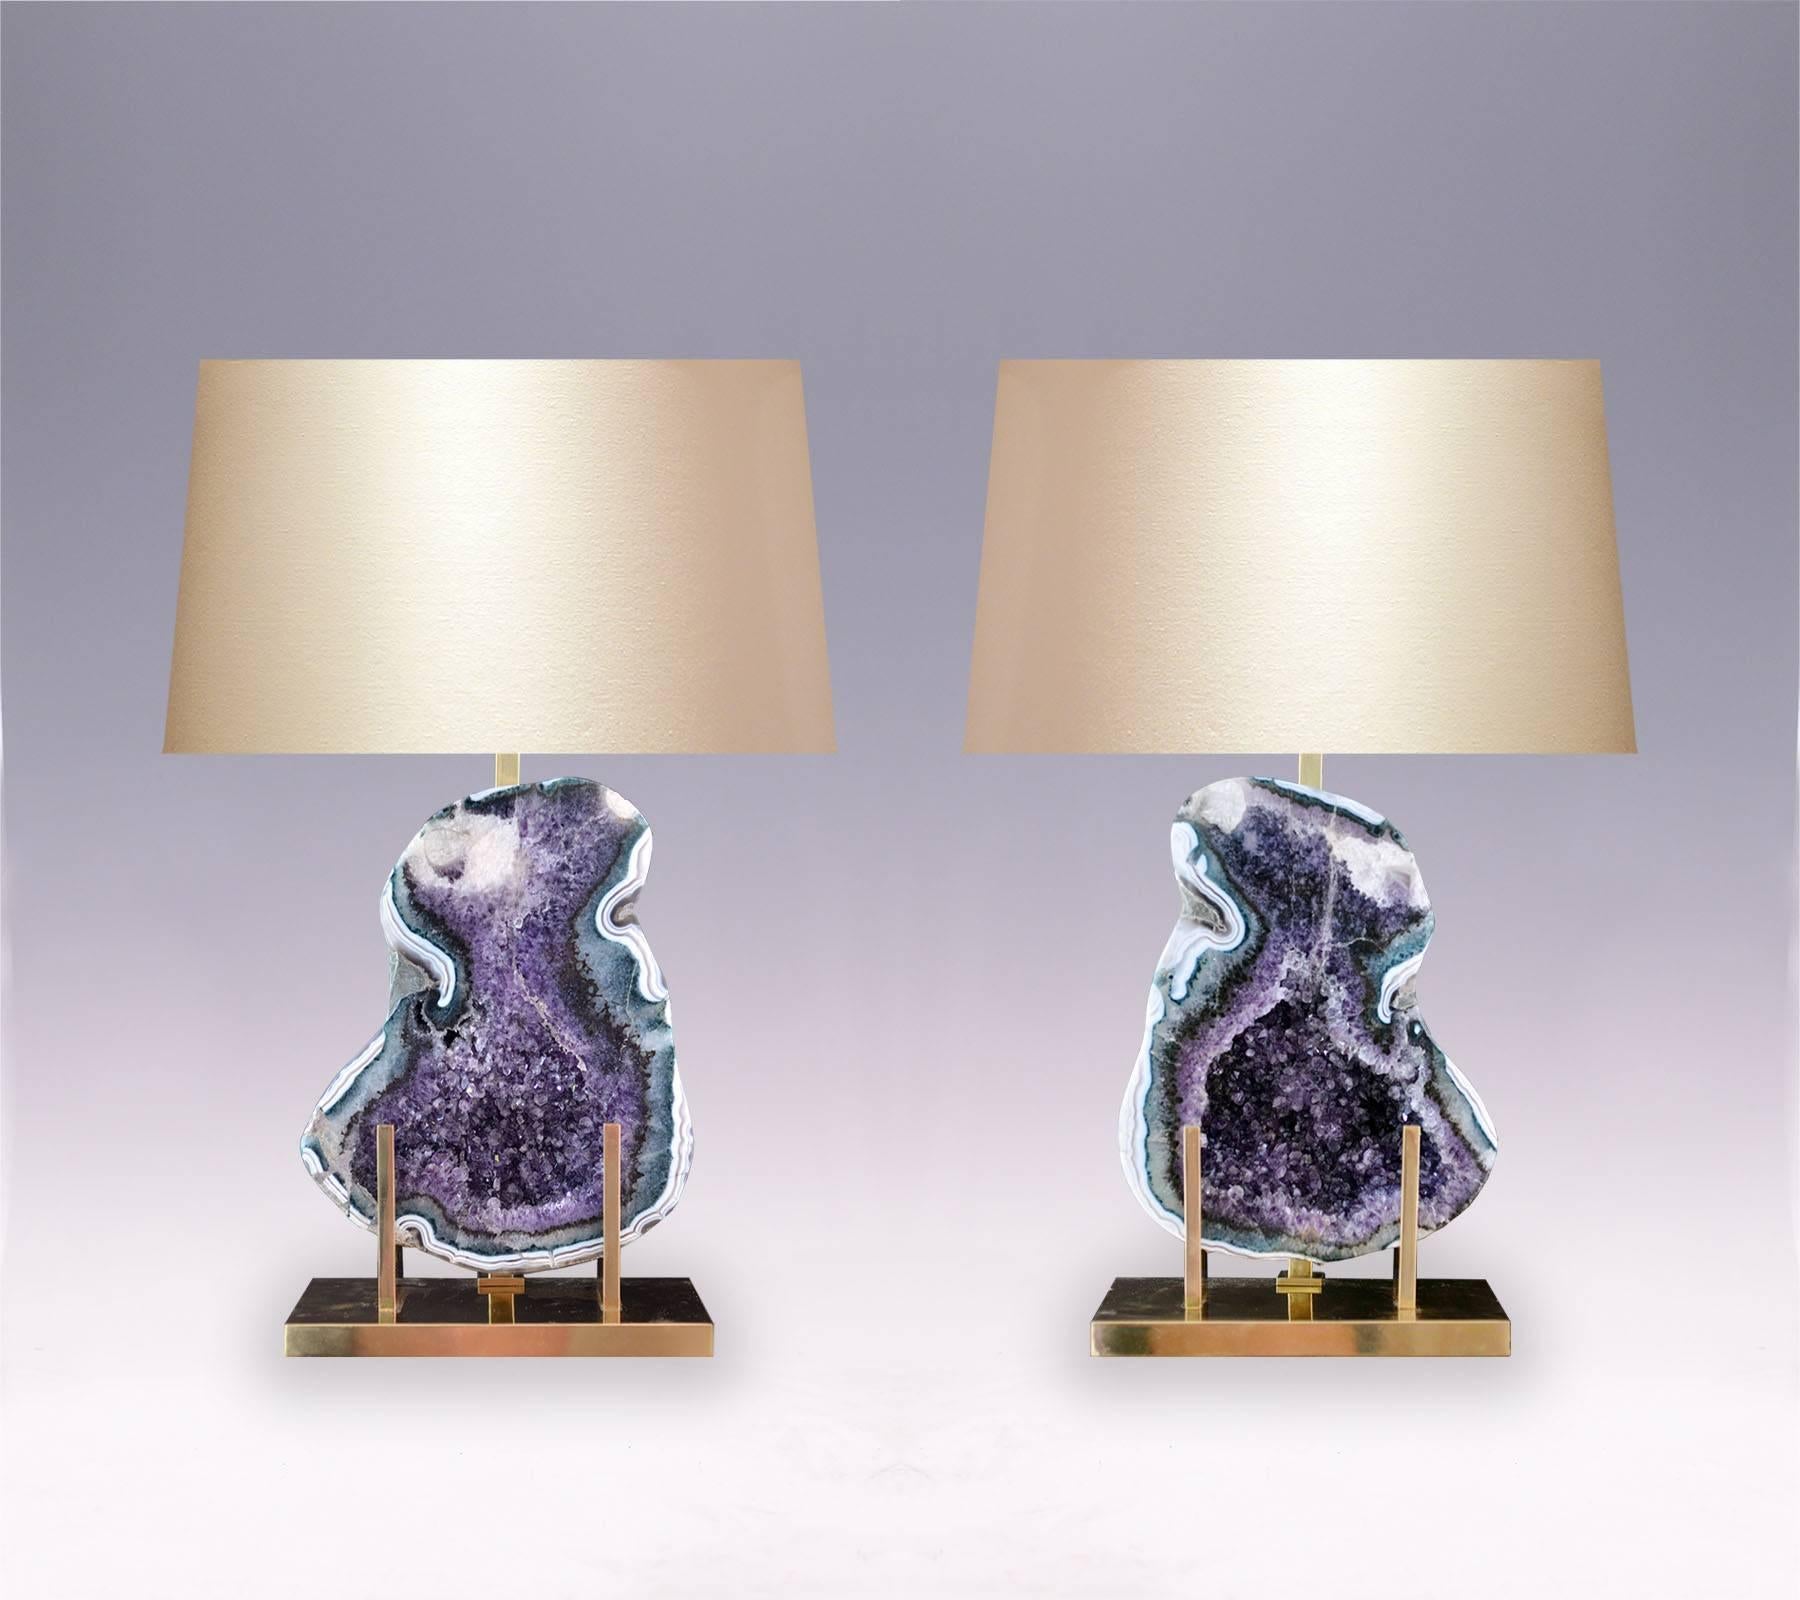 A pair of natural amethyst rock crystal lamps with amazing colorful amethyst stones, with polished brass mount, created by Phoenix Gallery, NYC.
(Lampshade not included).

For more Rock Crystal lightings and accessories from Phoenix gallery, please